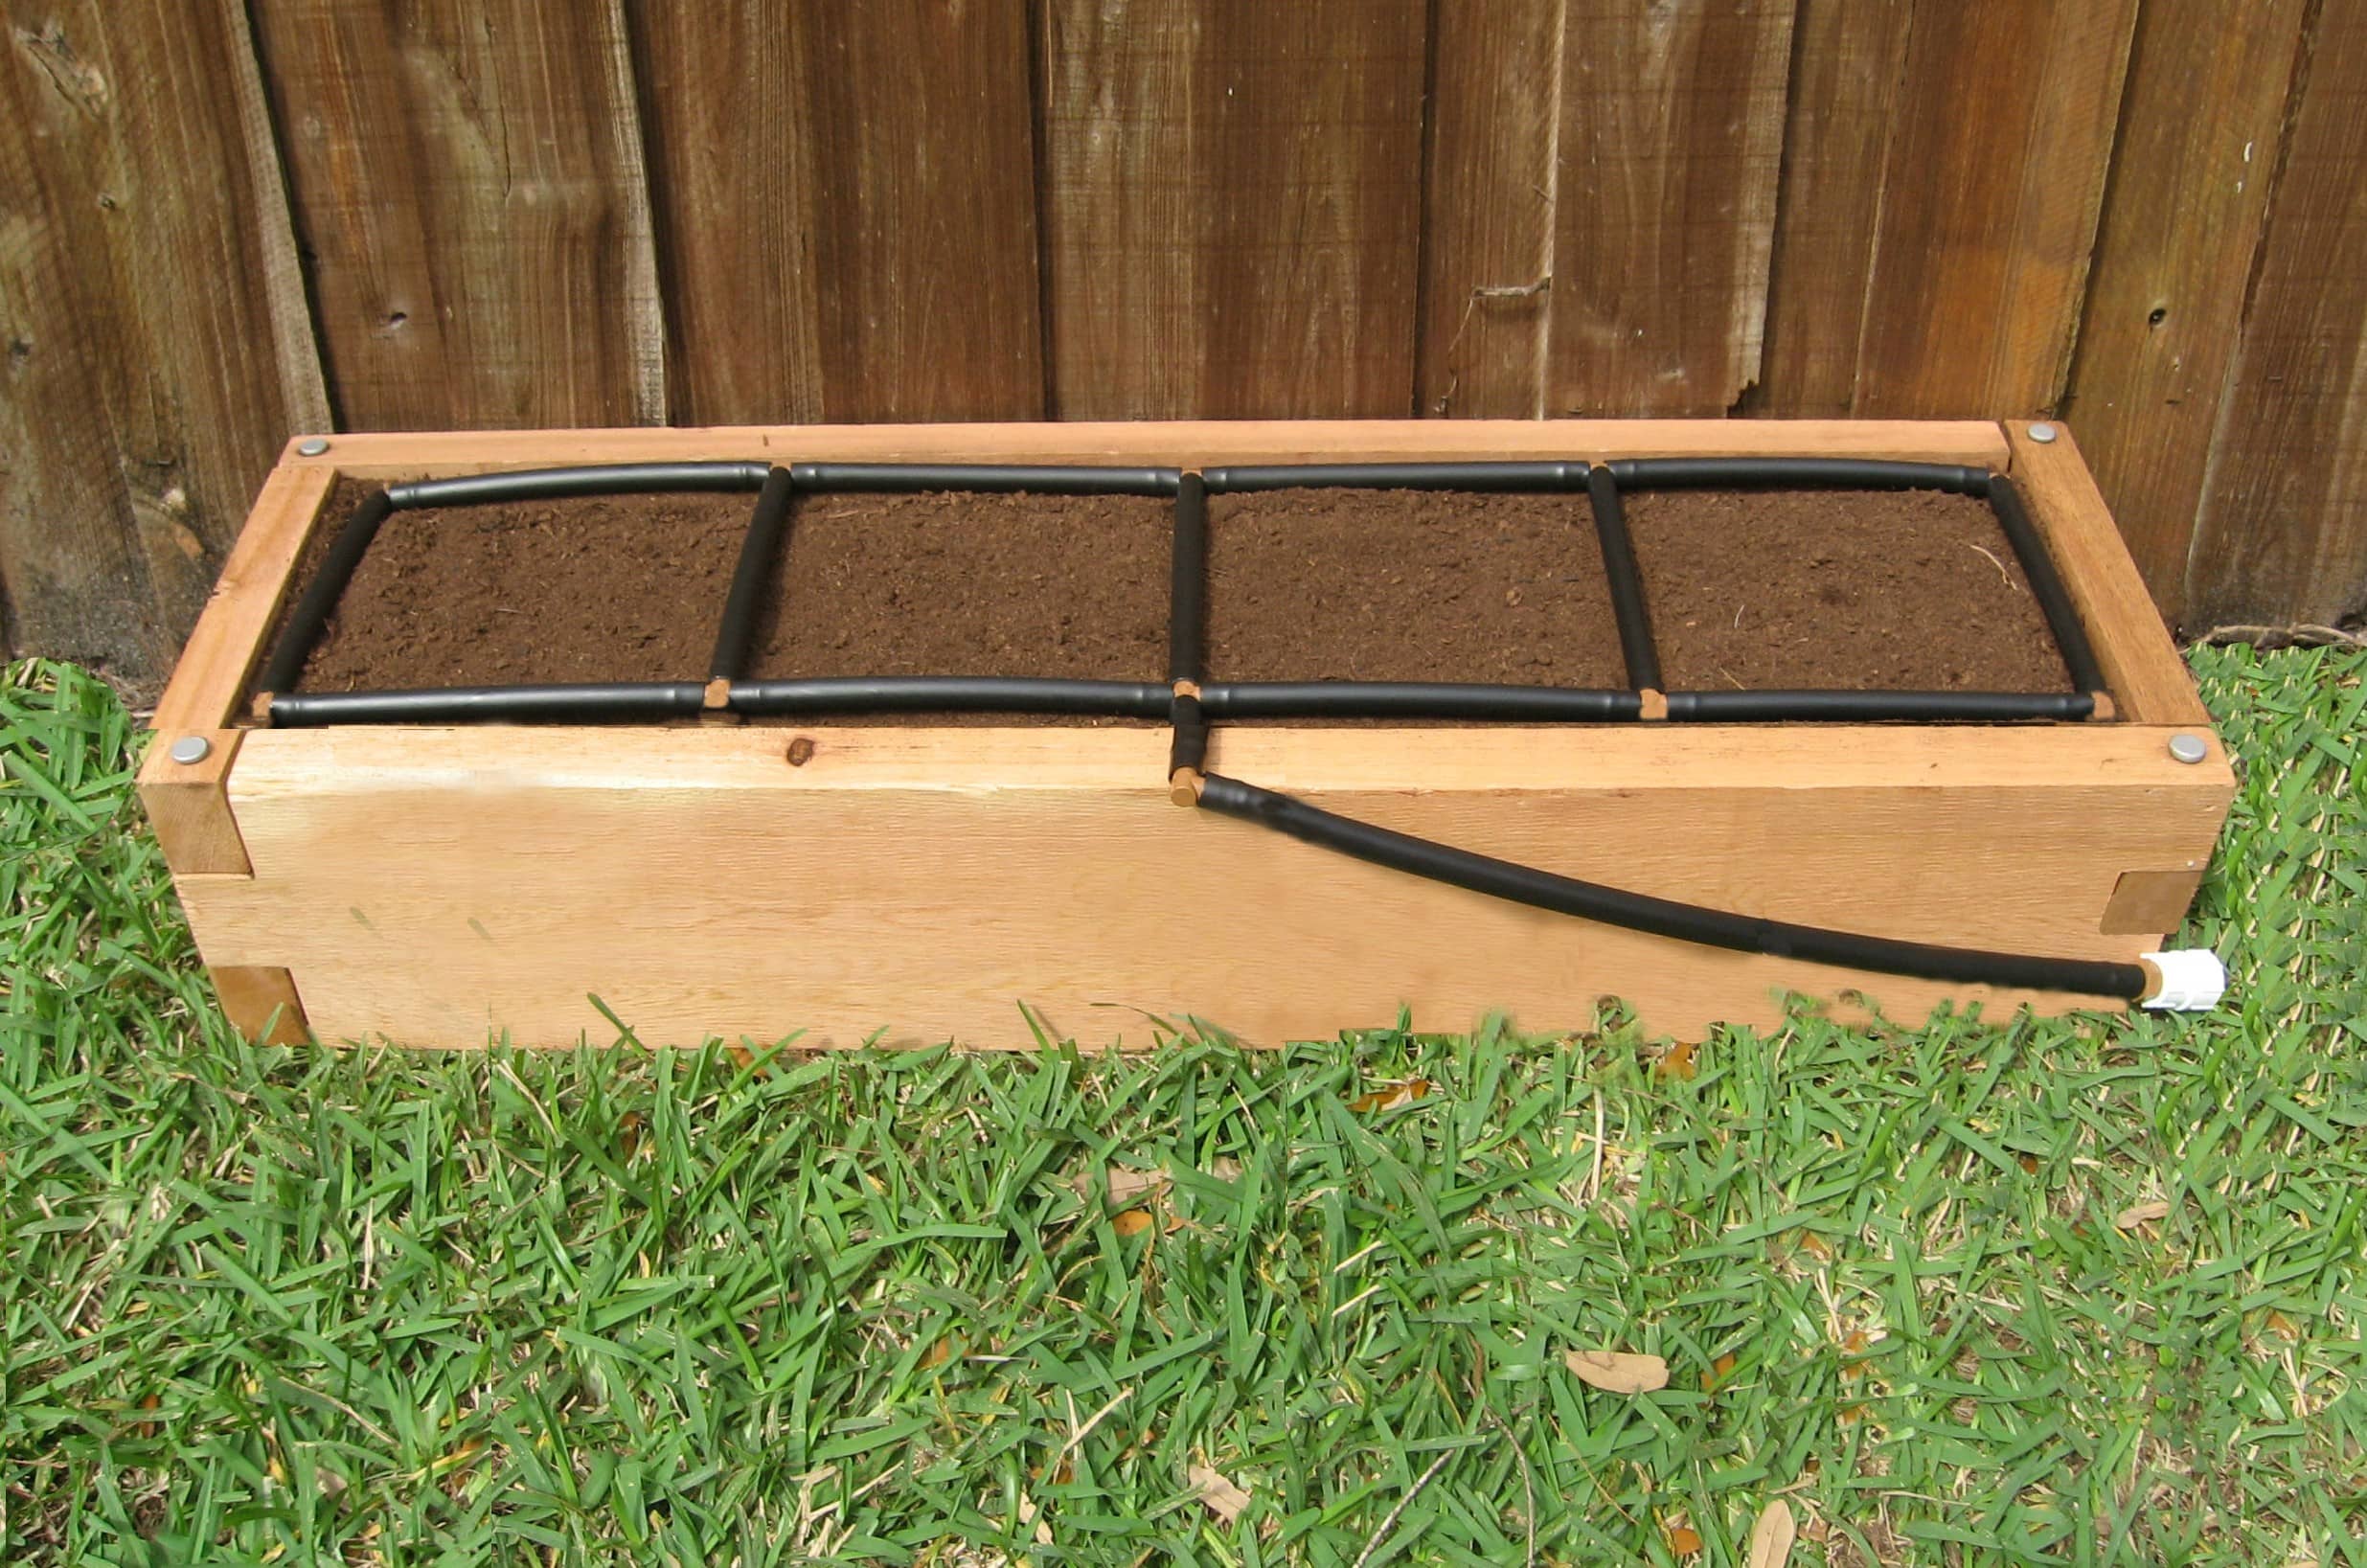 The Garden Grid™ Watering System - 1x4